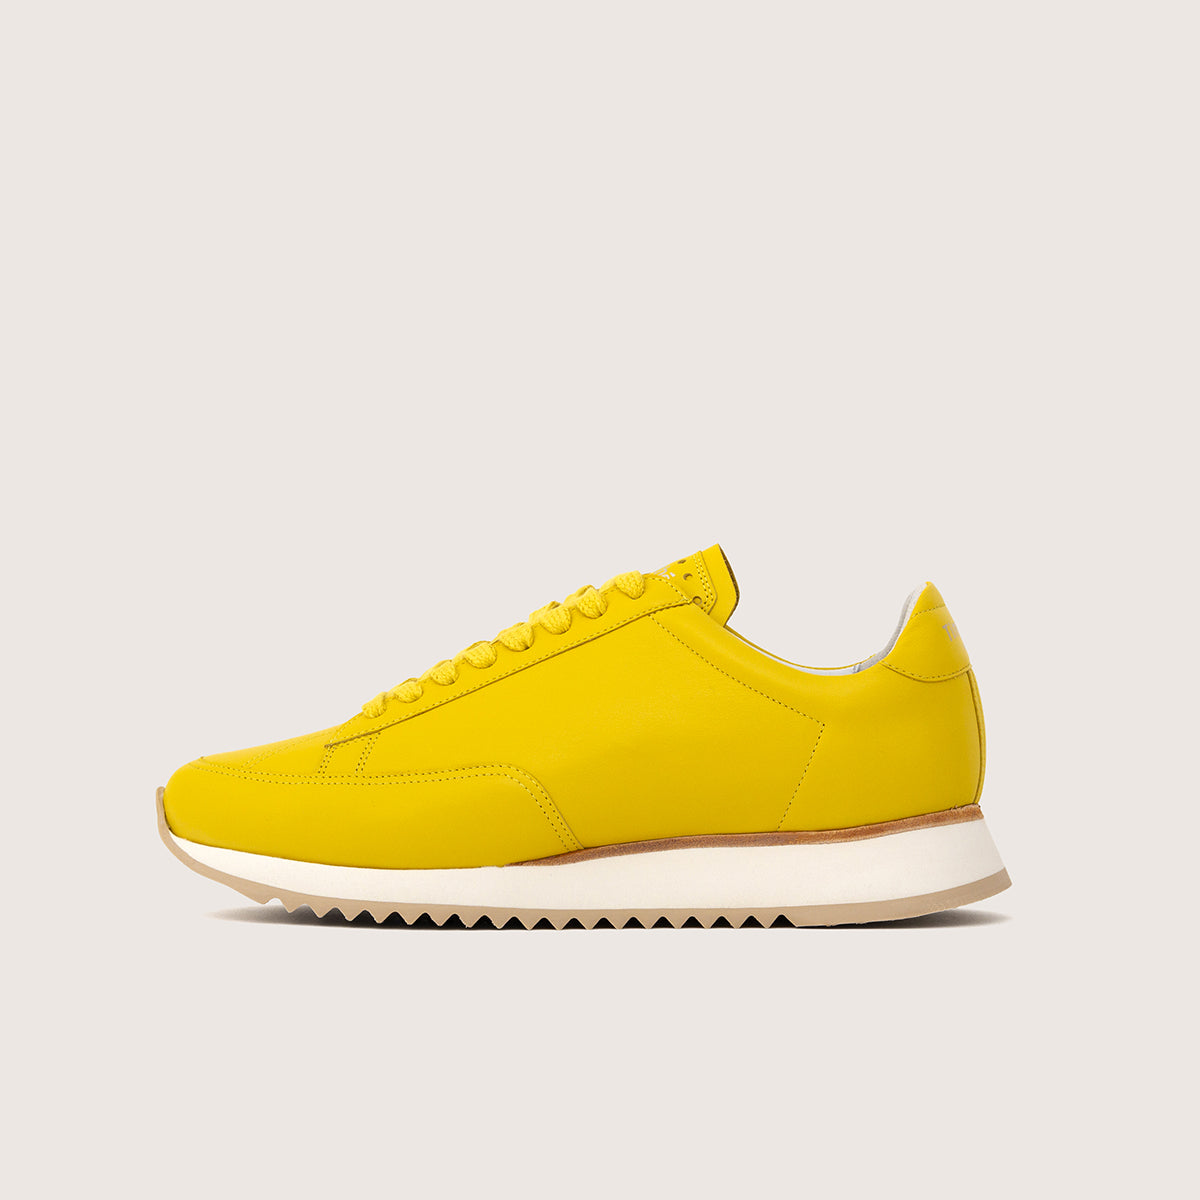 sneaker-cabourg-nappa-butter-yellow-timothee-paris-side-view-lifestyle-brand-big-size-picture